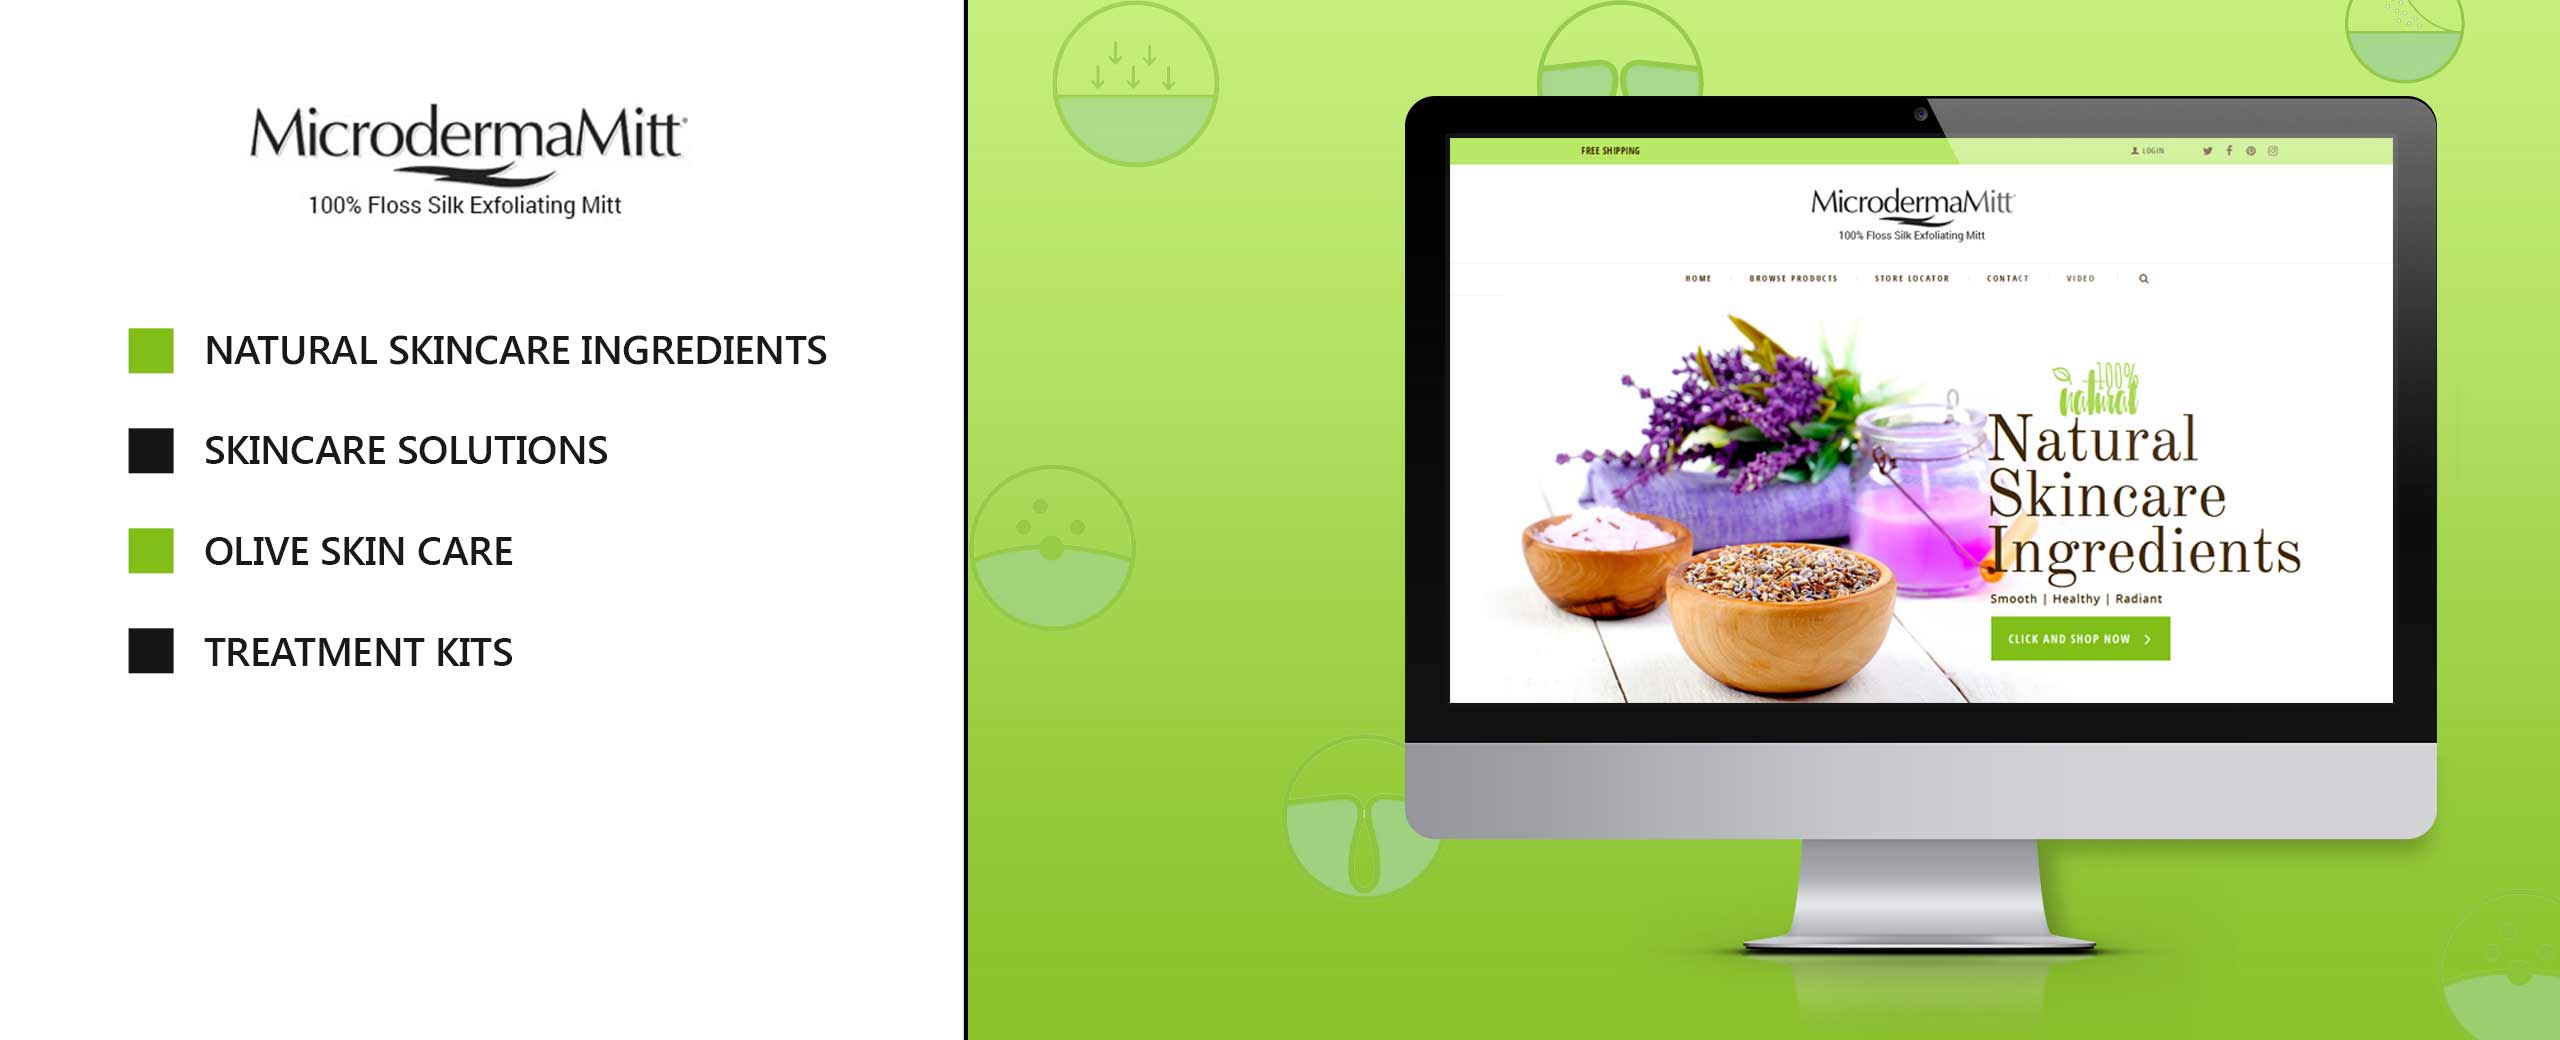 Herbal Skin Care products company chose to hire our expert WordPress developers to